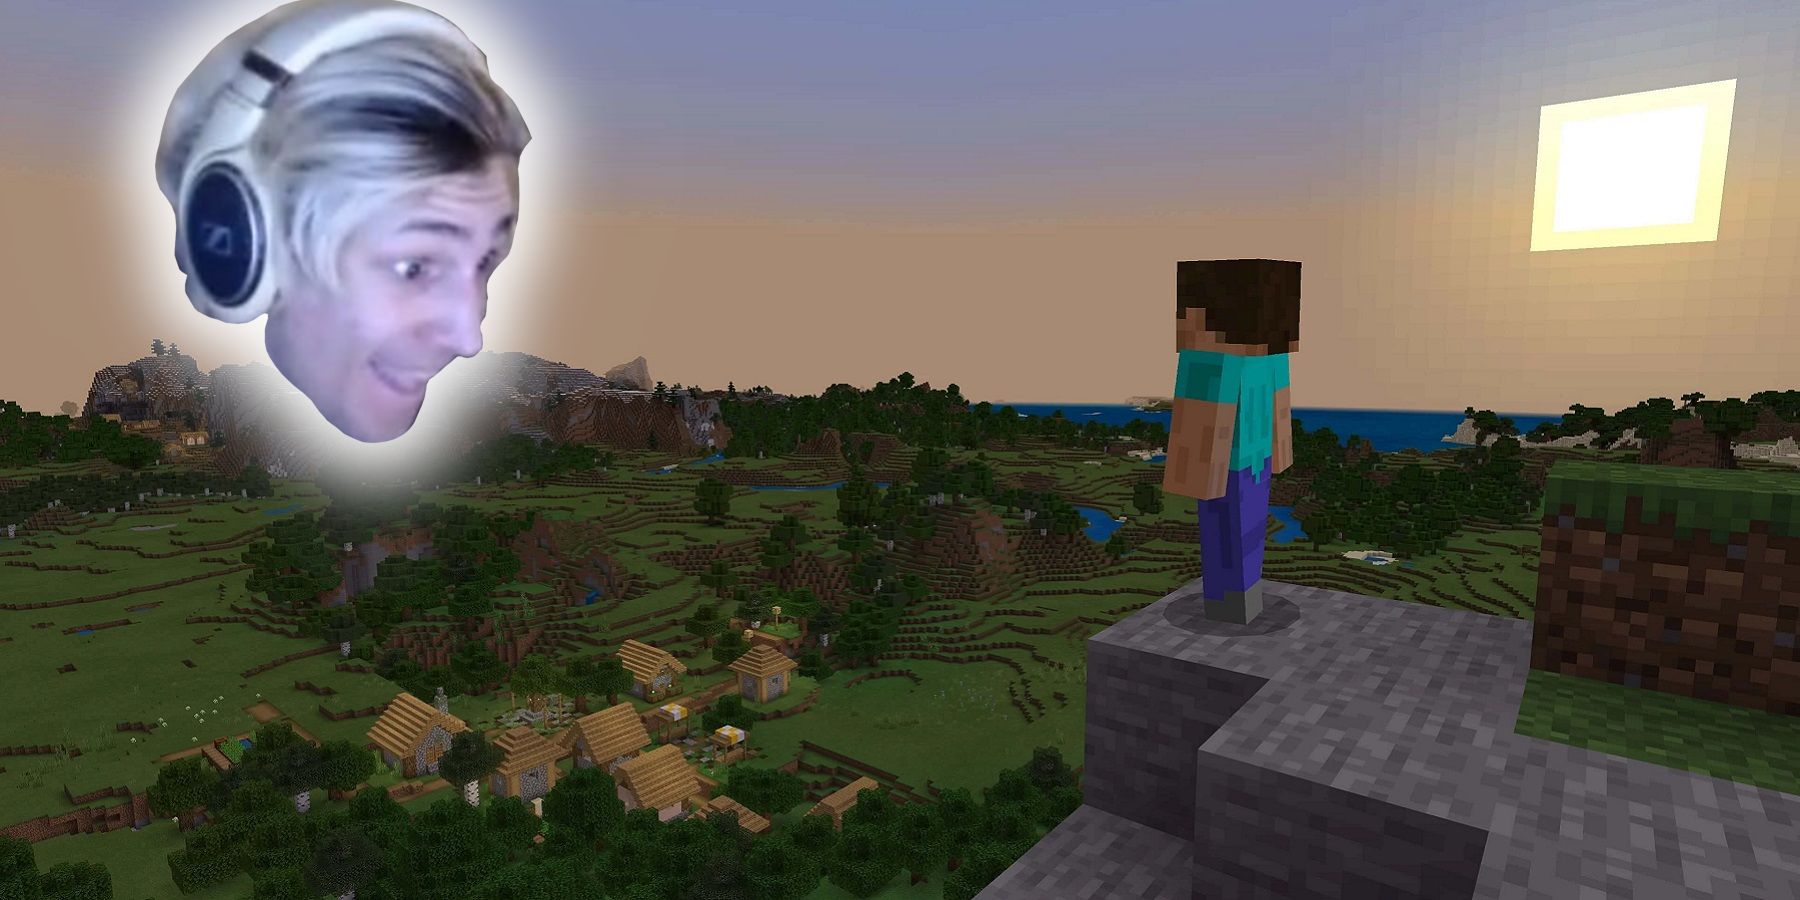 Image from Minecraft showing Steve looking up at the floating head of Twitch streamer xQc.